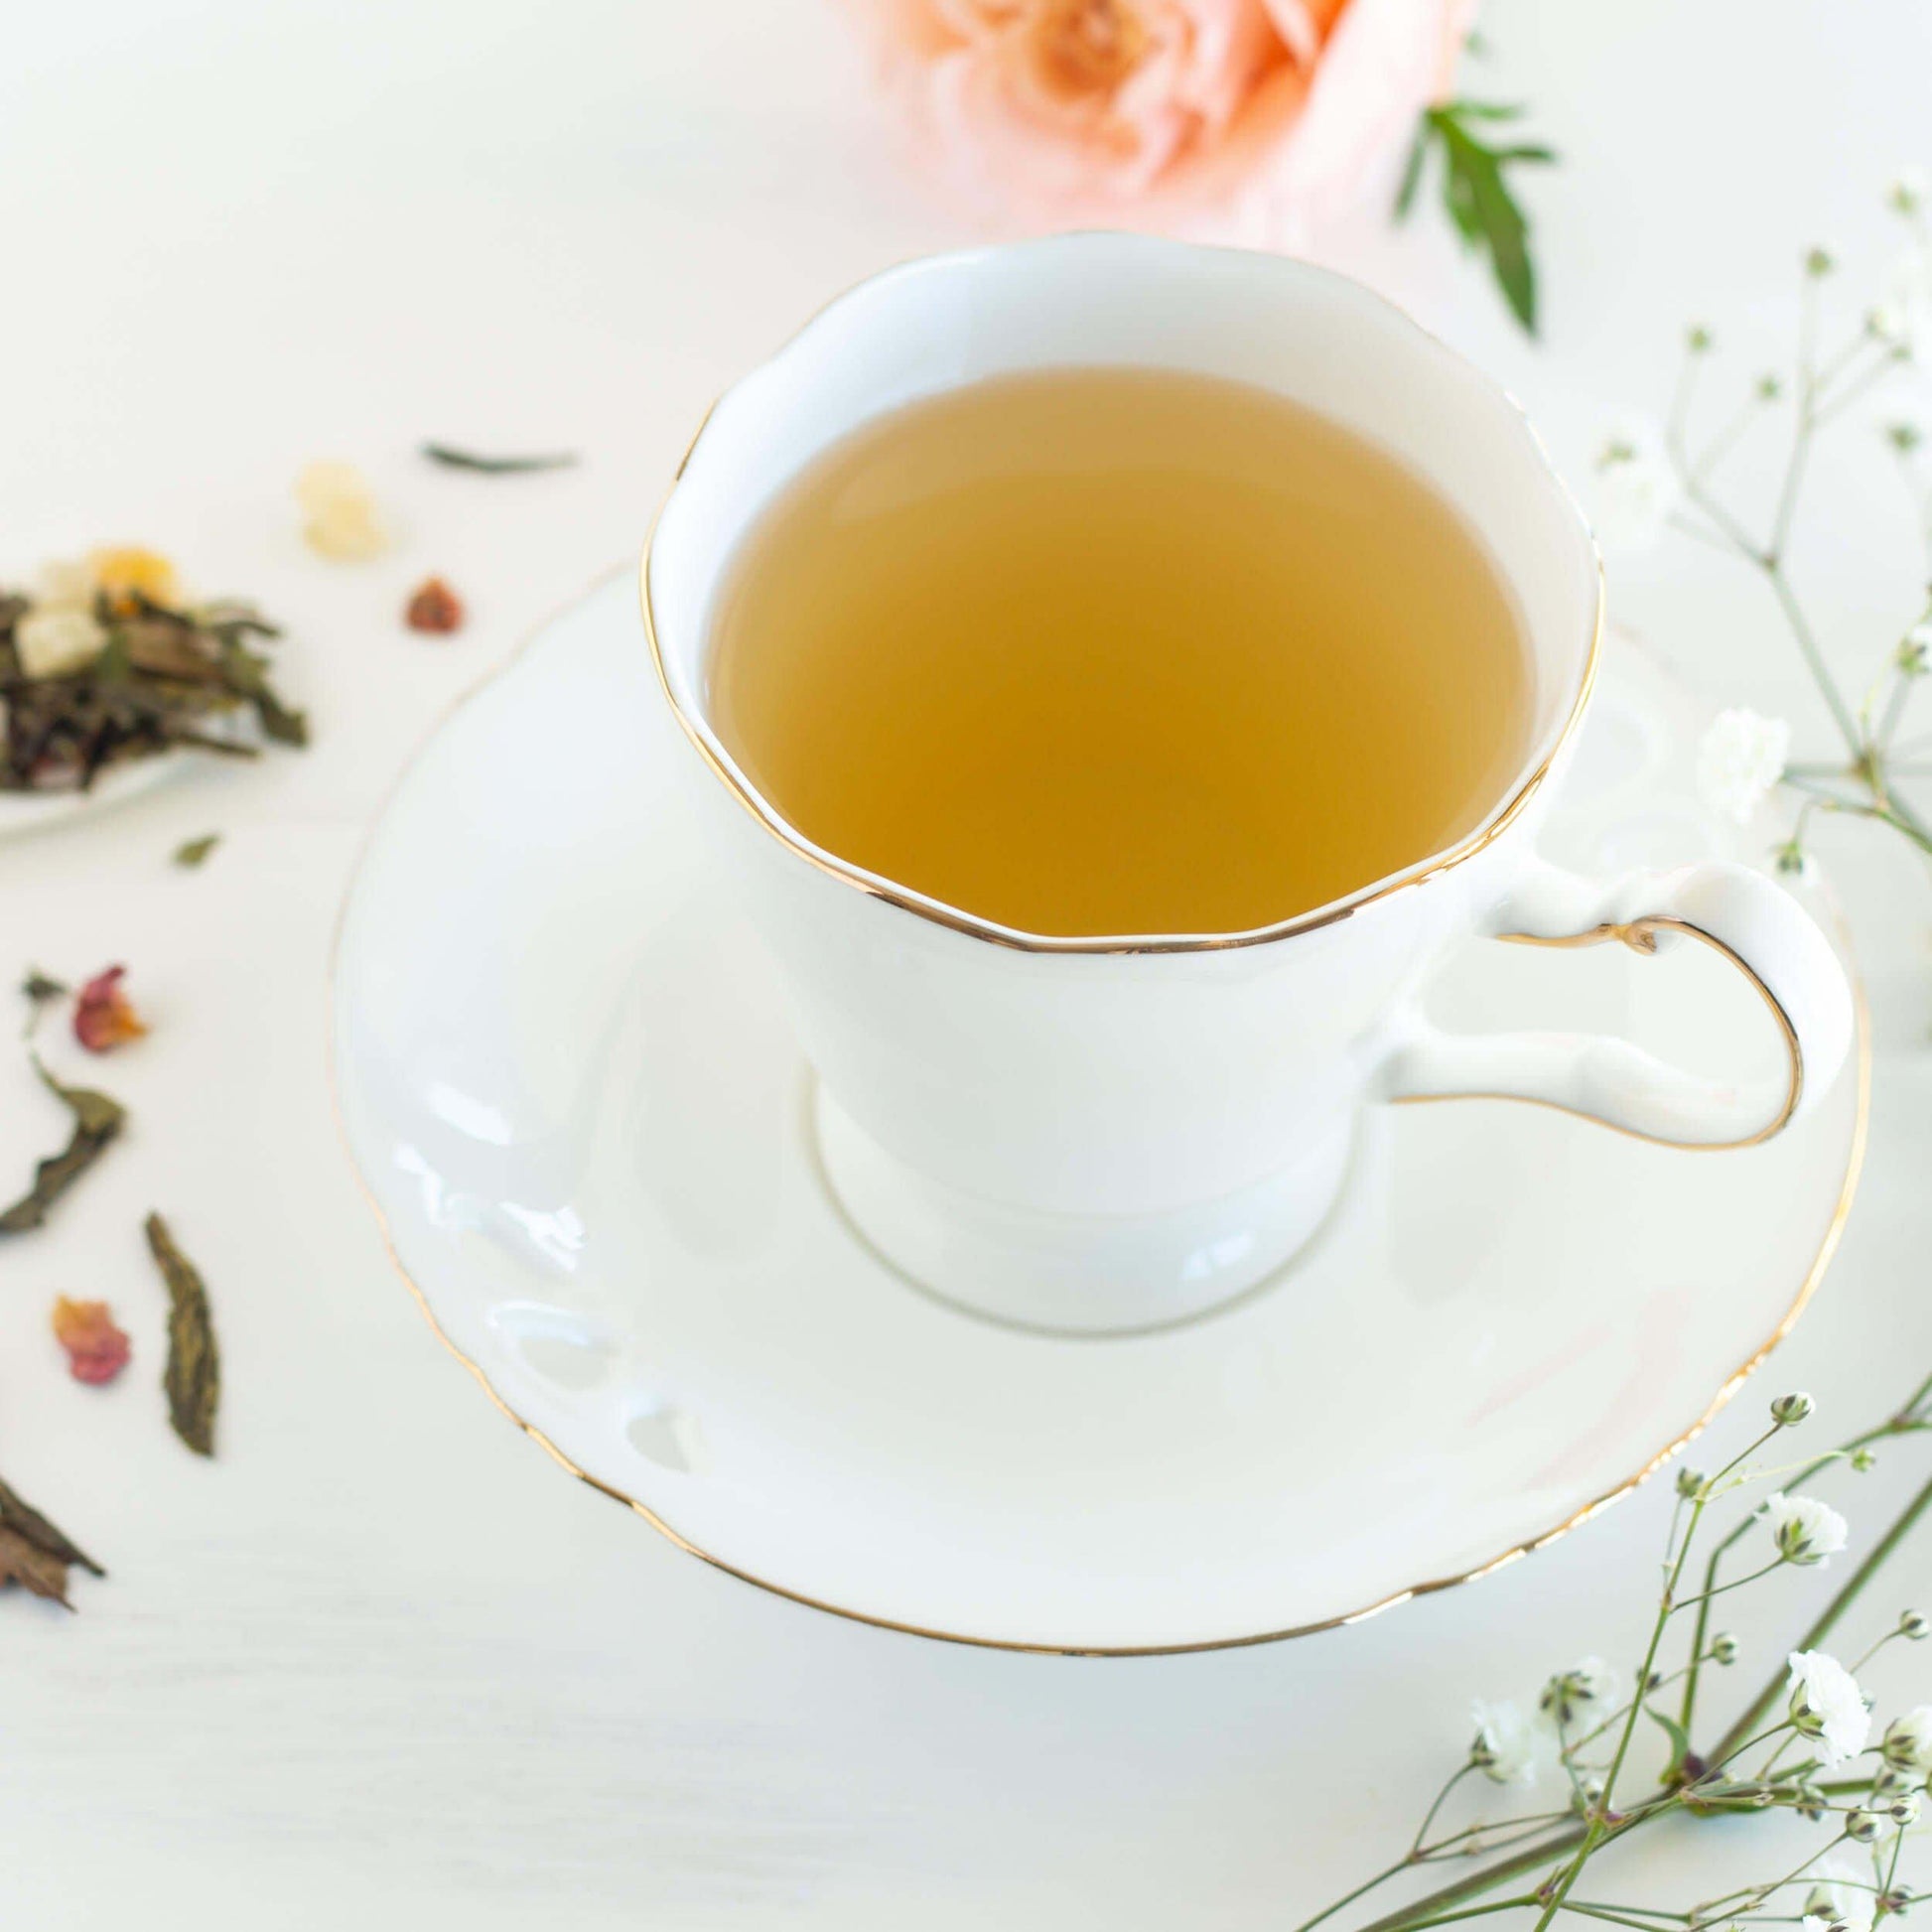 Spring Fancy Green and White Tea blend shown as brewed tea in a traditional white teacup and saucer with gold trim. Cup is surrounded by baby's breath, a pink rose, and loose tea leaves